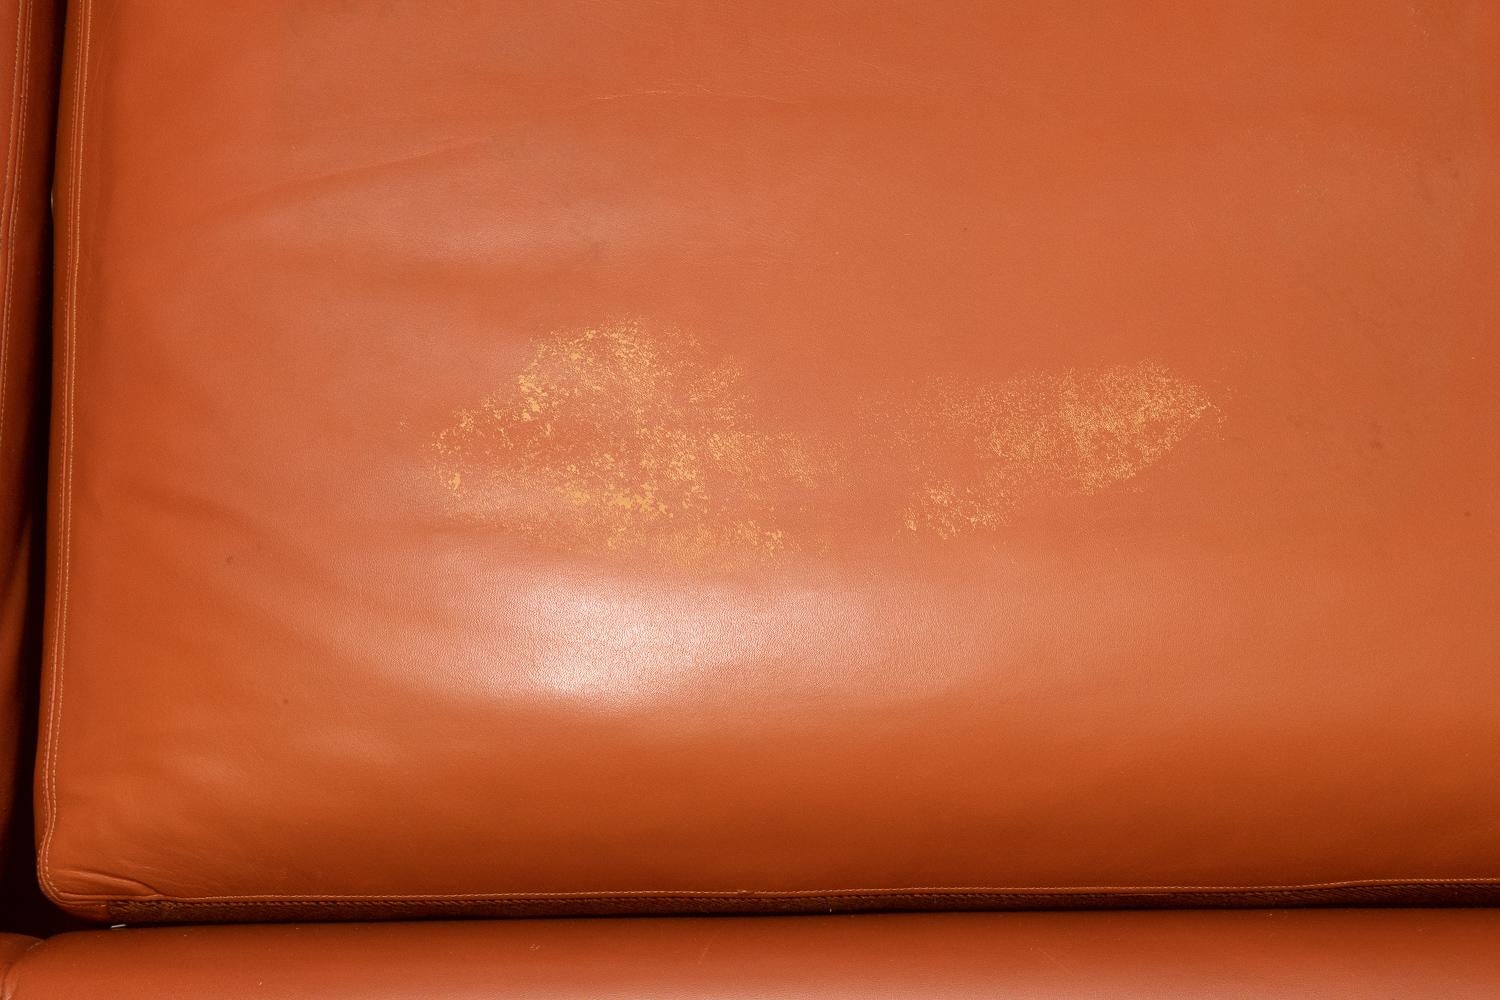 Knoll Sofa by Charles Pfister 1971 Original Sabrina Leather, #1, '2 Available' For Sale 8